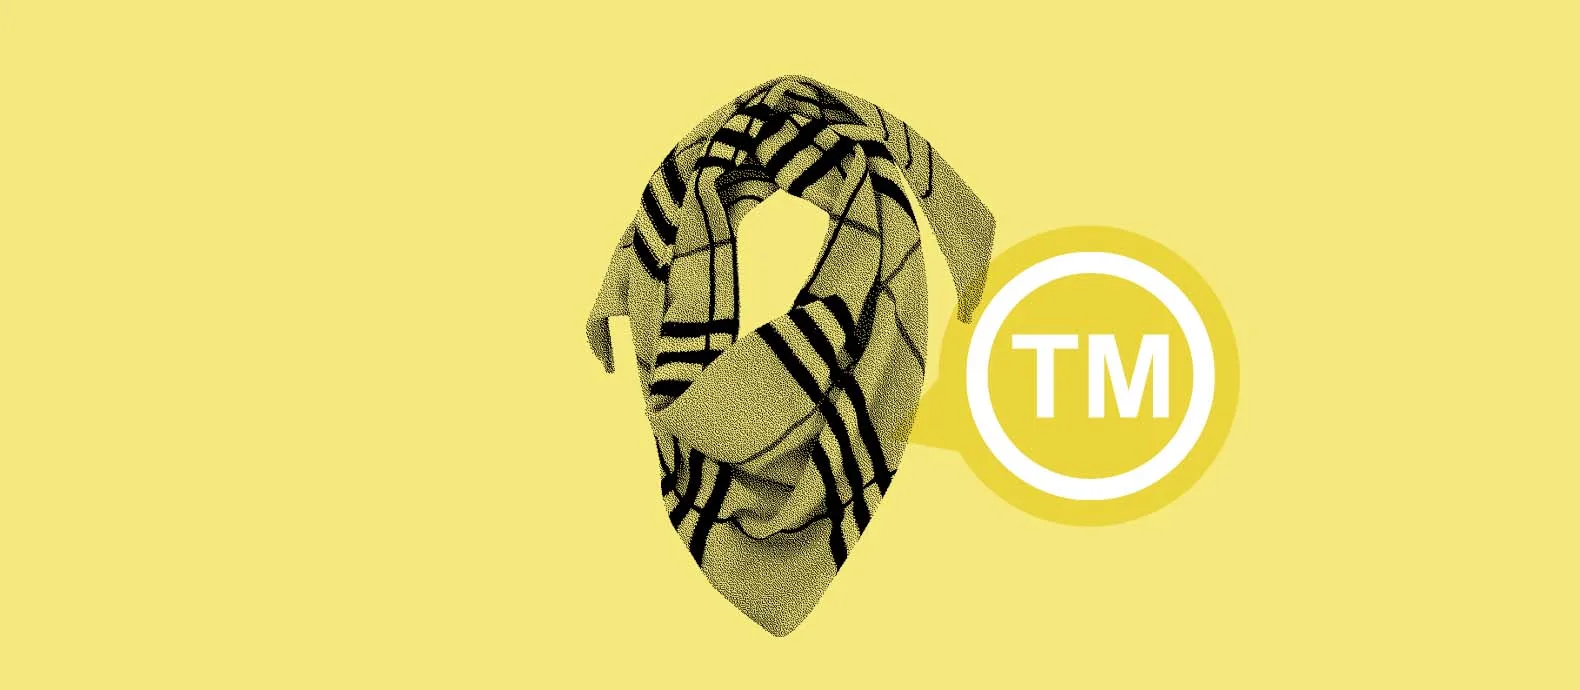 A complete guide to trademark infringement in the fashion industry